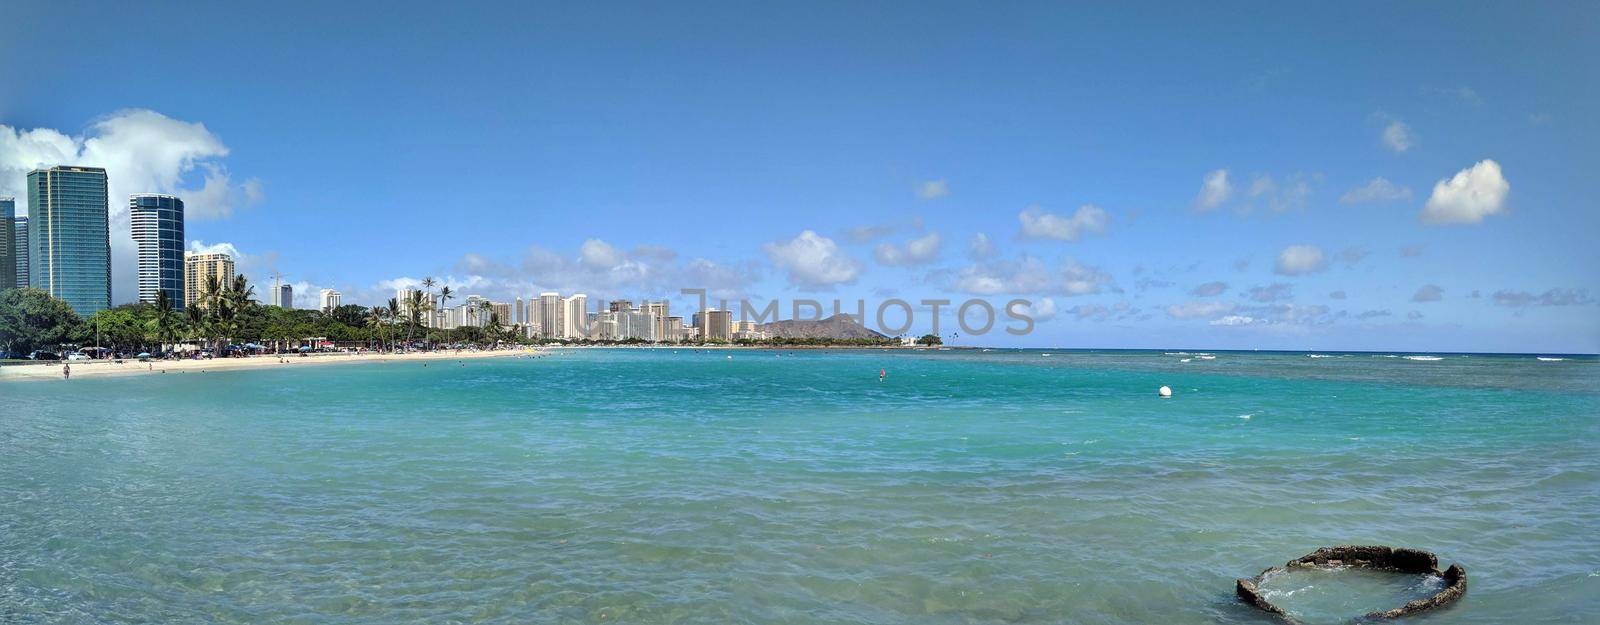 Ala Moana Beach Park with office building and condos in the background during a beautiful day on the island of Oahu, Hawaii. 2018